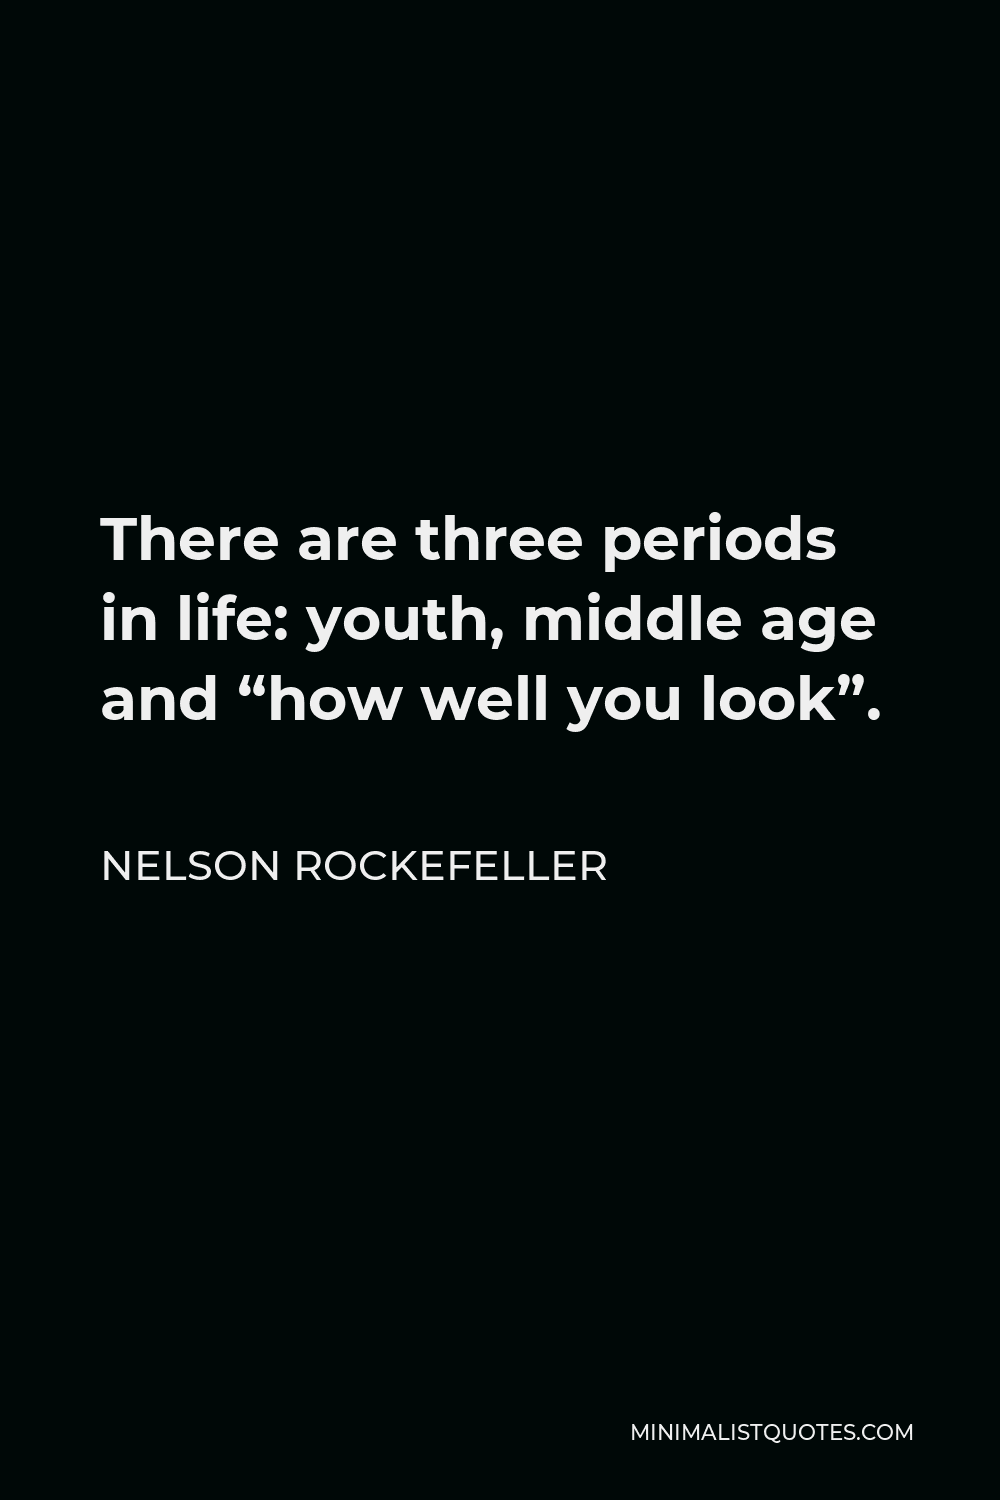 Nelson Rockefeller Quote - There are three periods in life: youth, middle age and “how well you look”.